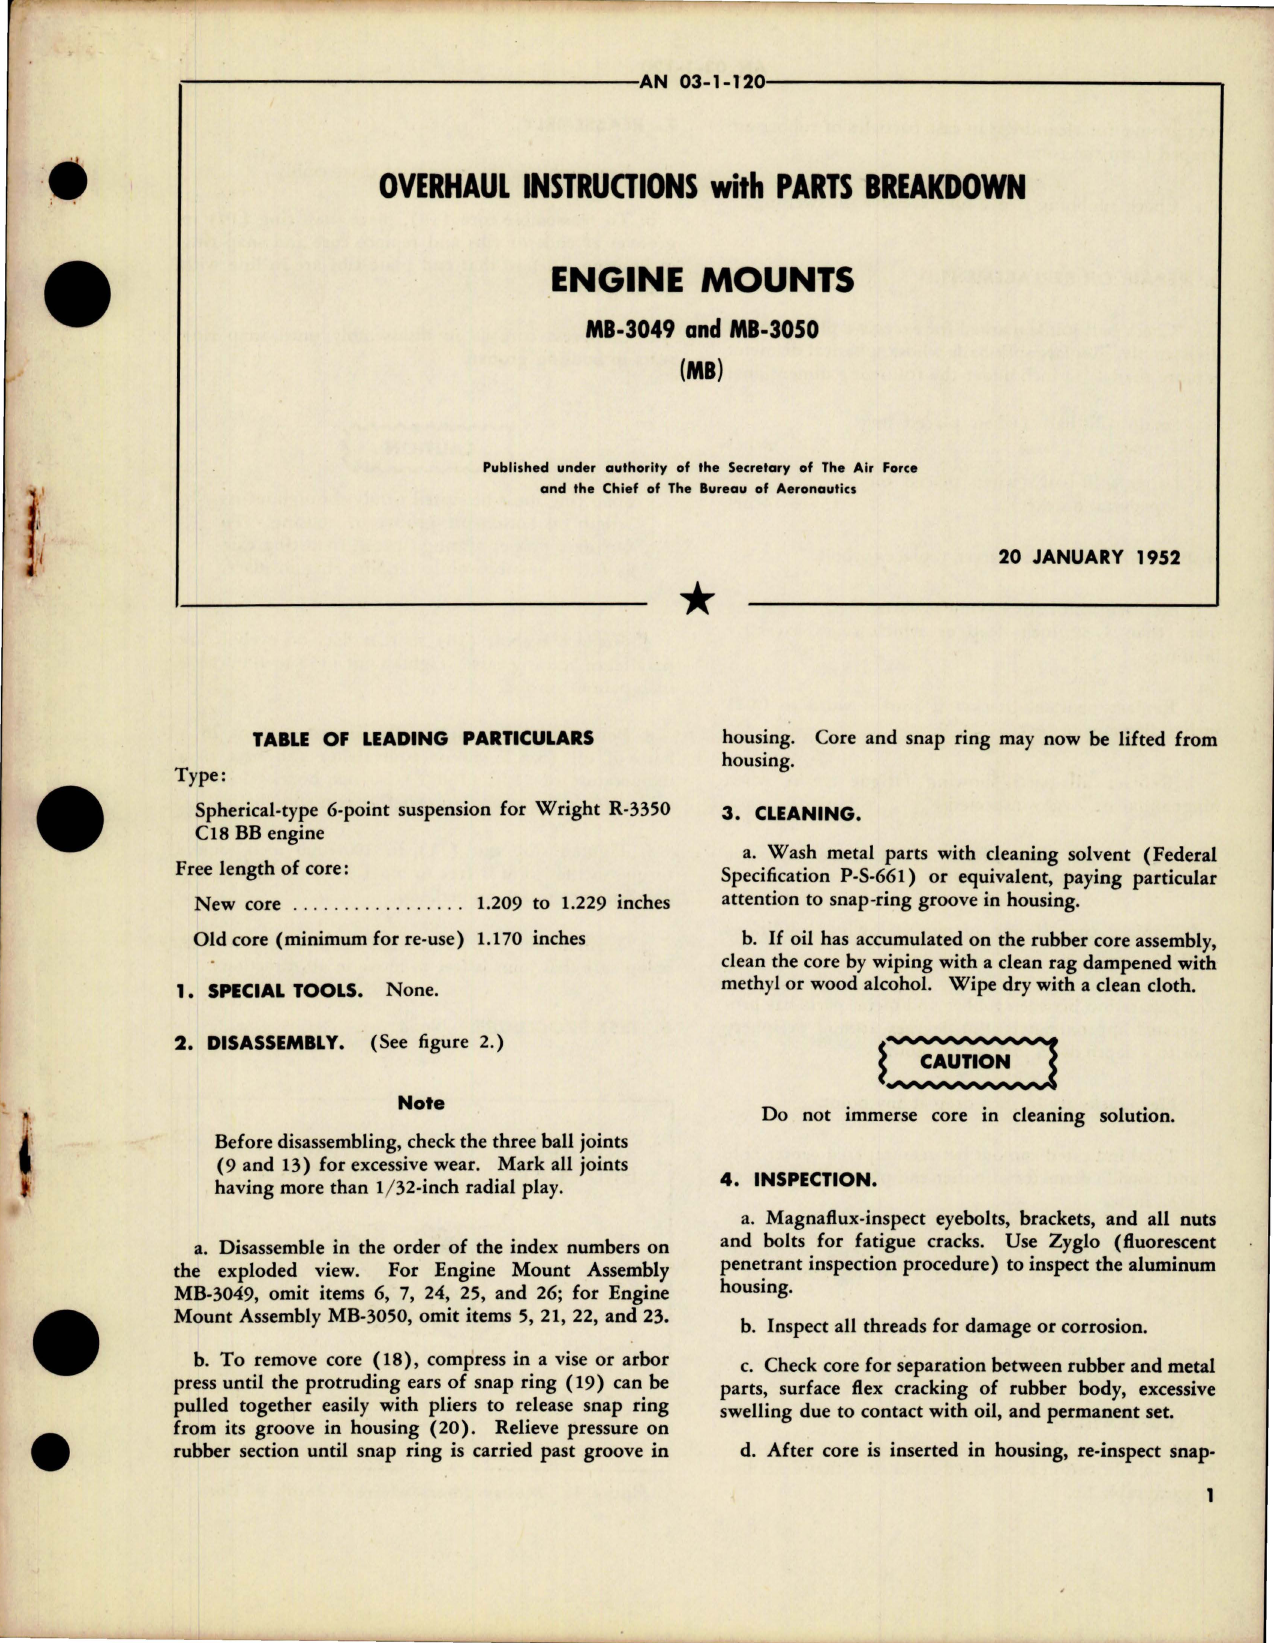 Sample page 1 from AirCorps Library document: Overhaul Instructions with Parts for Engine Mounts - MB-3049 and MB-3050